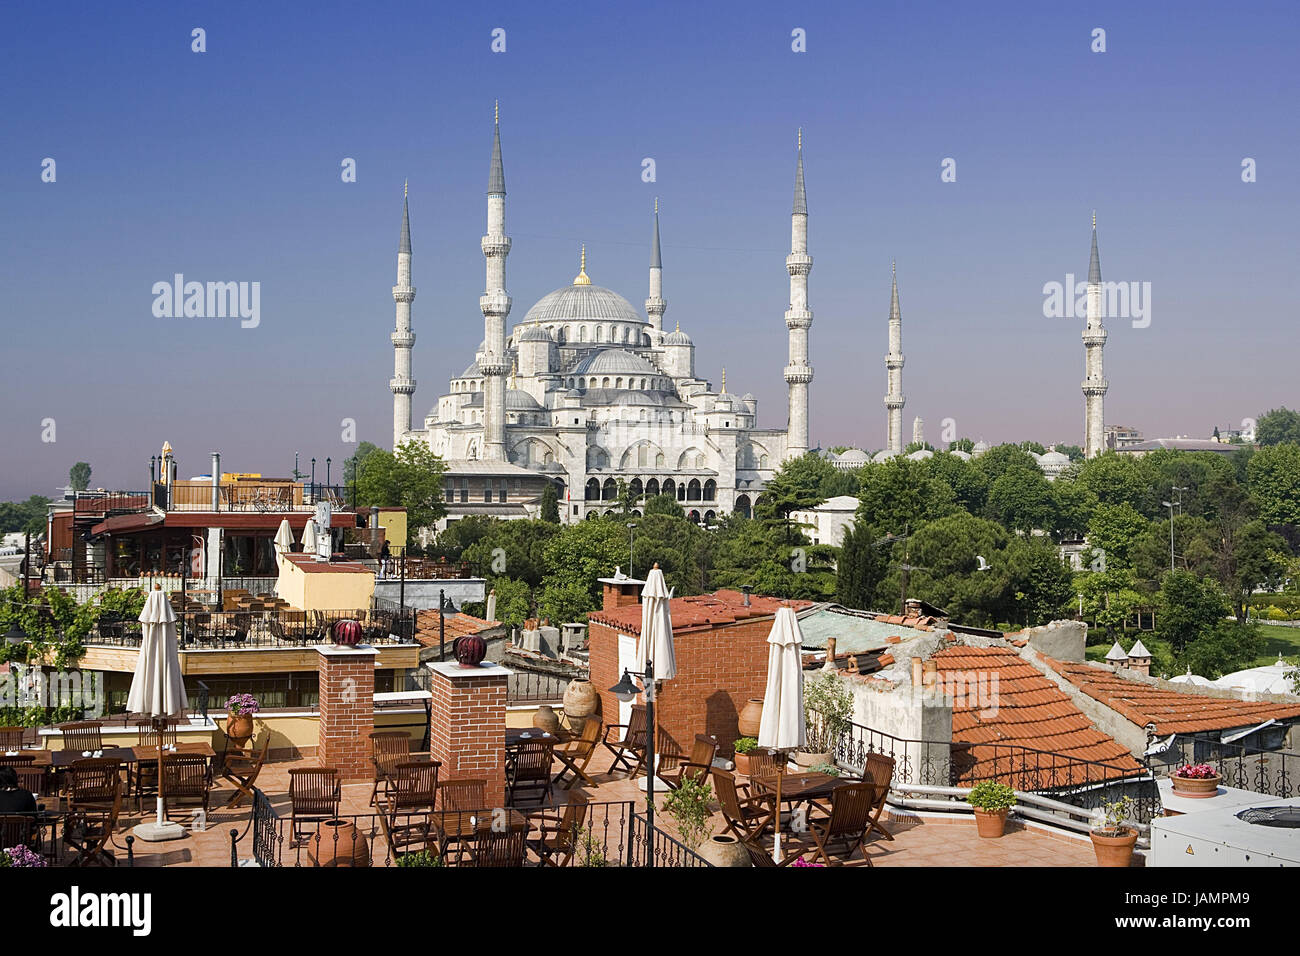 Turkey,Istanbul,roof terrace,view,sultan Ahmet Camii,'blue mosque',town,city,metropolis,port,culture,faith,religion,Islam,structure,historically,architecture,church,sacred construction,Sultan-Ahmet-Camii,sultan's Ahmed's mosque,mosque,domed building,towers,landmarks,place of interest,minarets,domes, Stock Photo